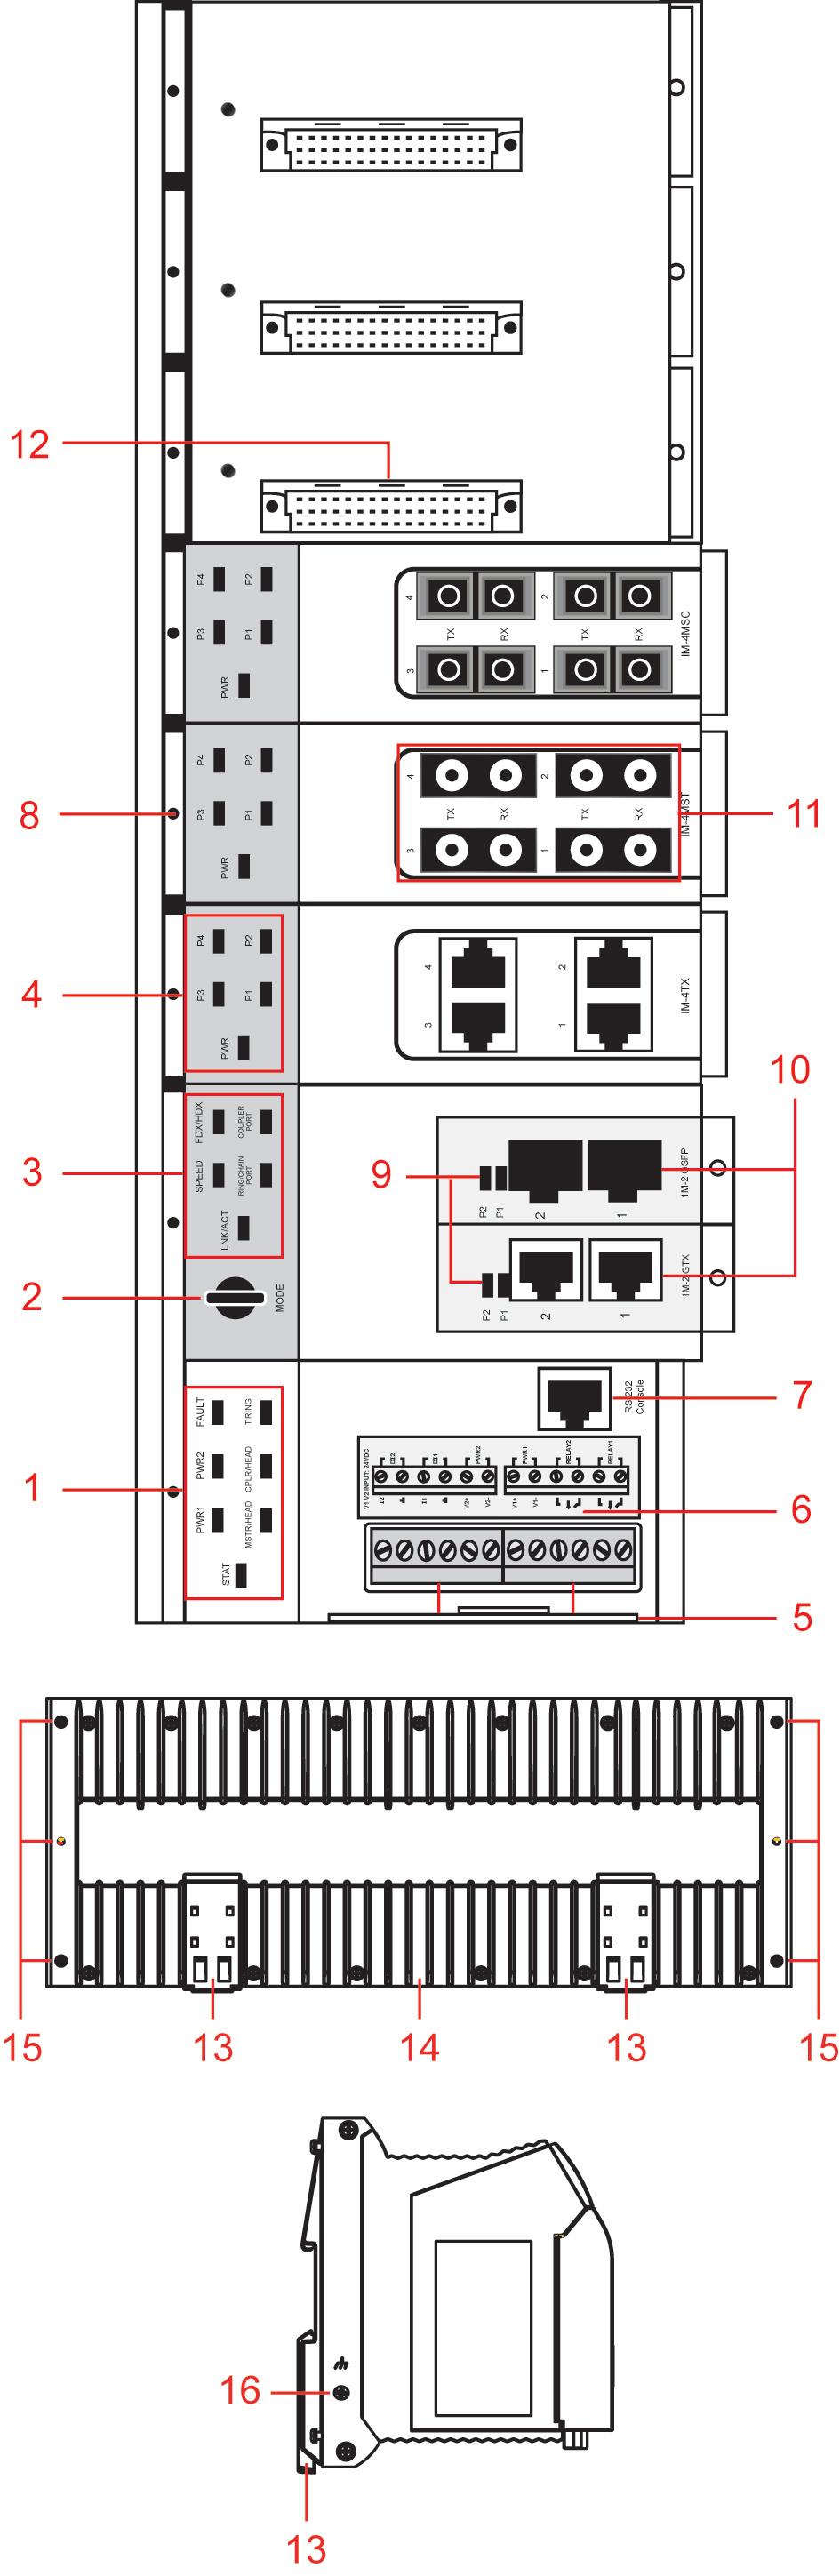 EDS-728/828 Series Panel Layout 1. System status LEDs 2. Push-button switch to select mode for Interface Module 3. Interface Module mode LEDs 4. Fast Ethernet Interface Module port LEDs 5.